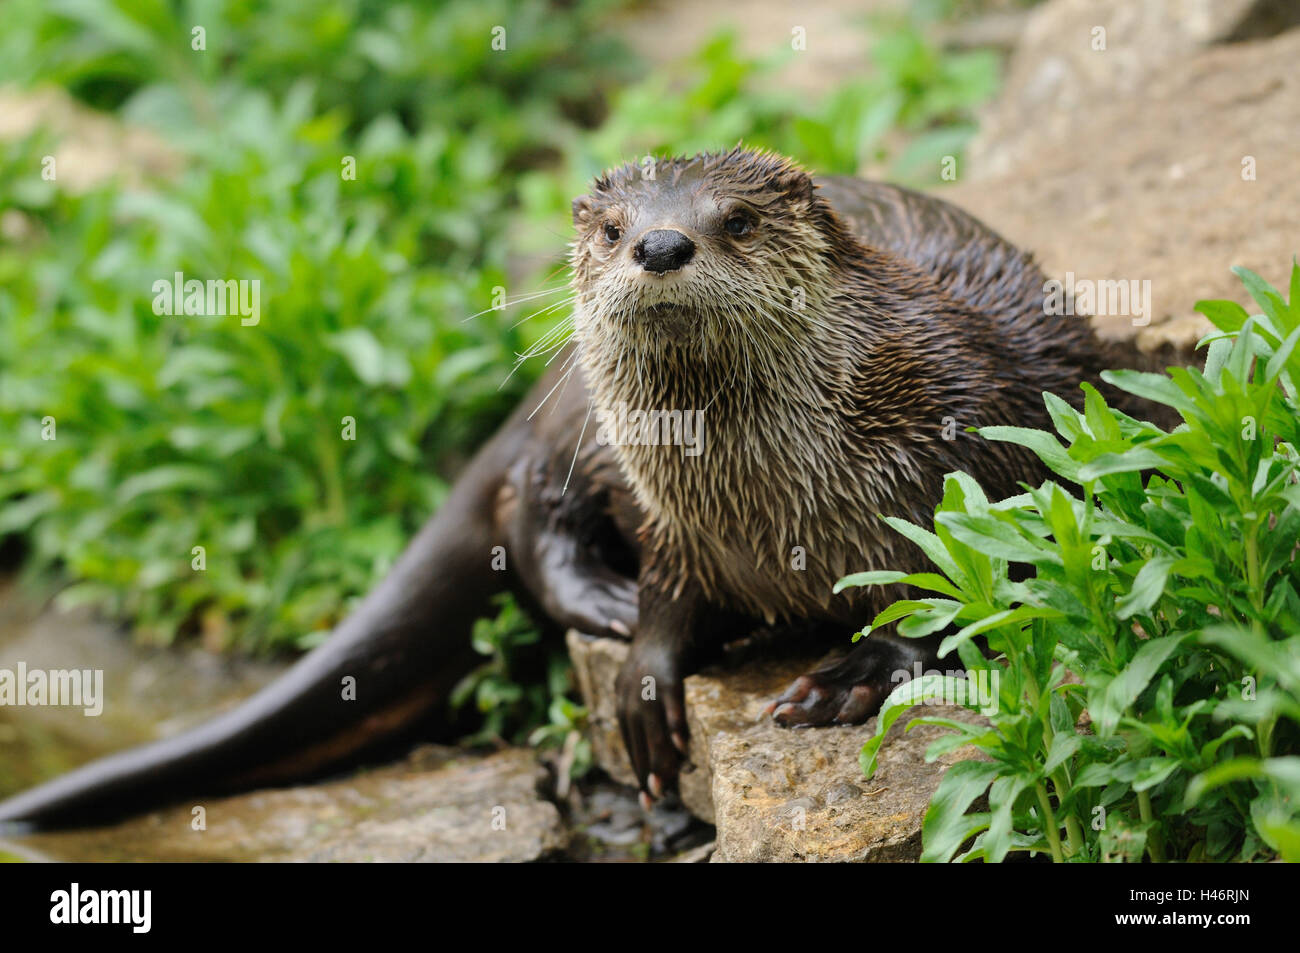 Northern river otter, Lutra canadensis, rock, front view, lying, looking at camera, Stock Photo